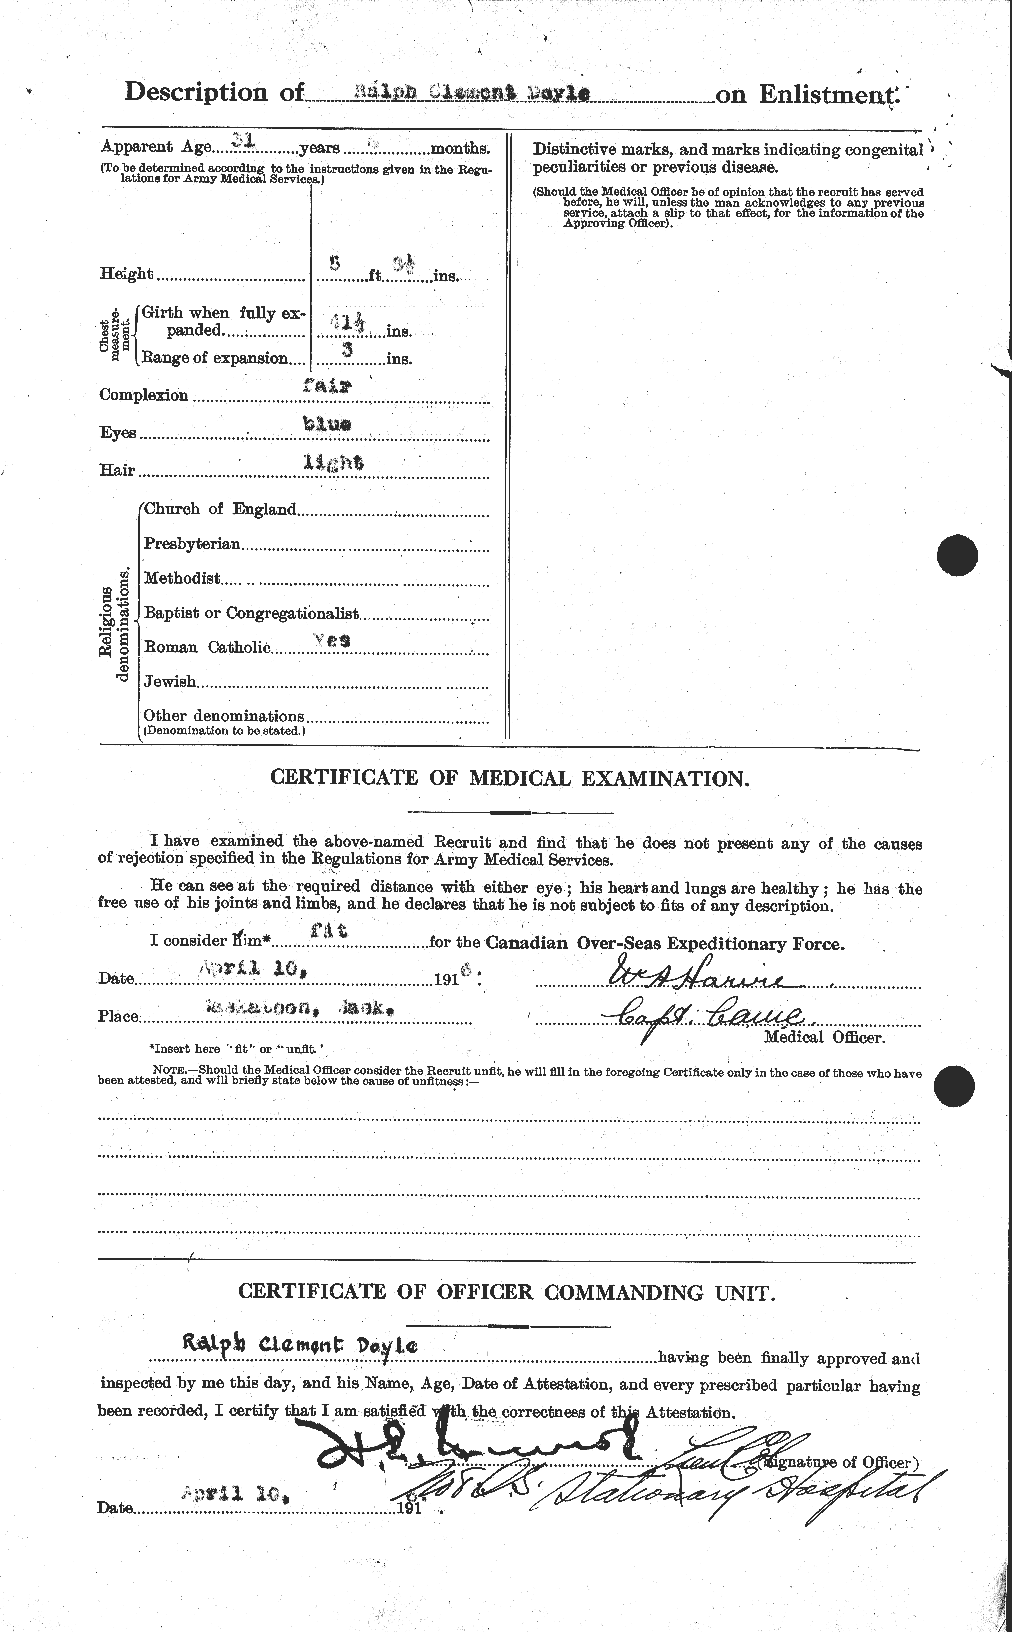 Personnel Records of the First World War - CEF 298691b